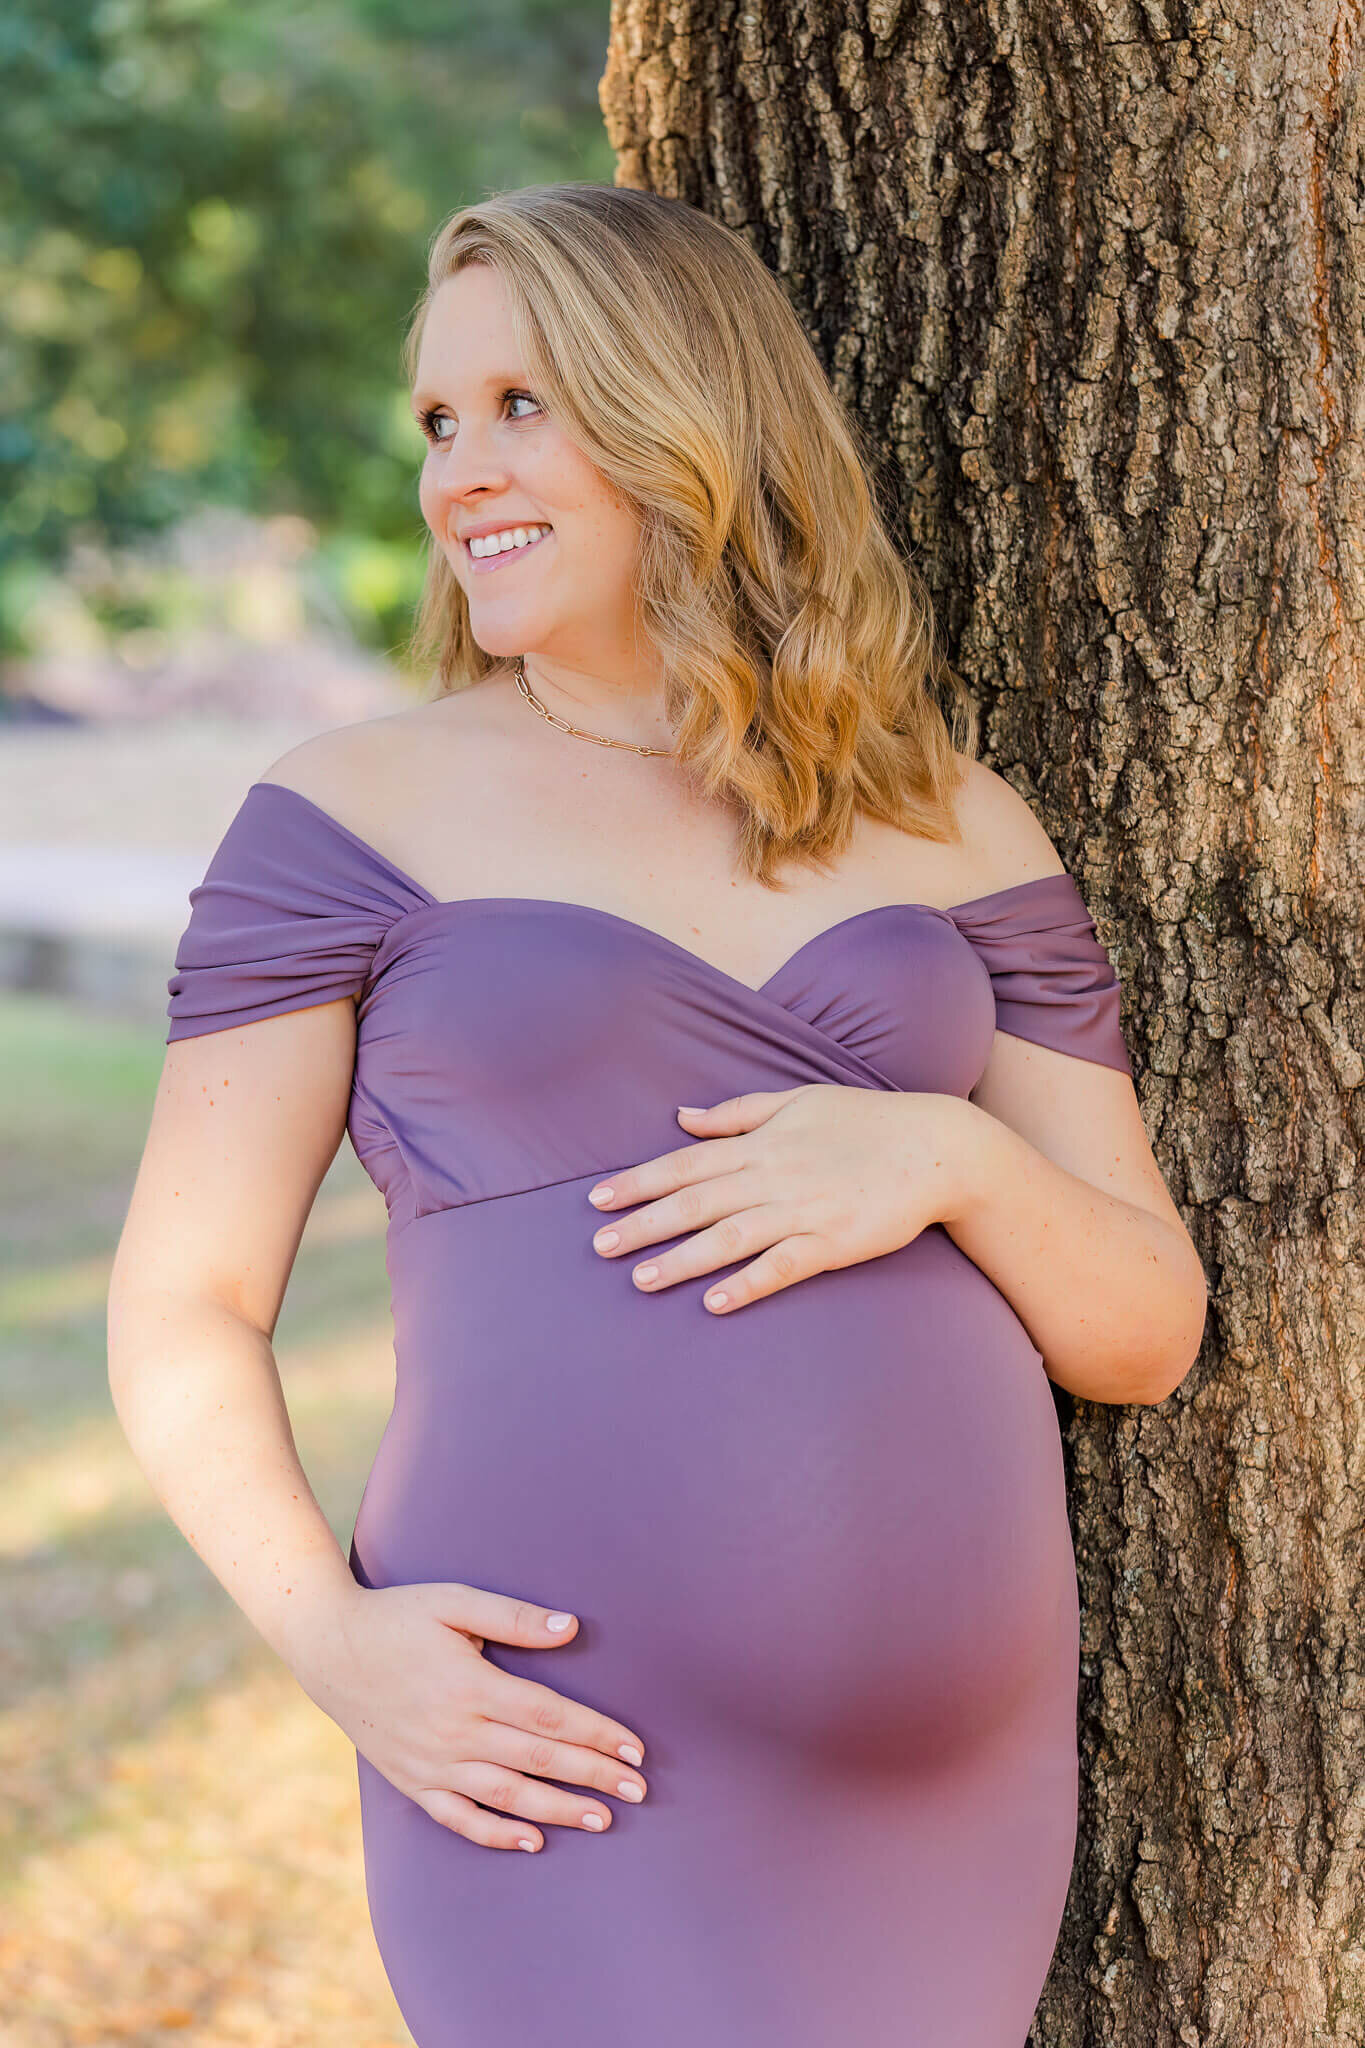 A maternity portrait of a woman in purple leaning against a tree.